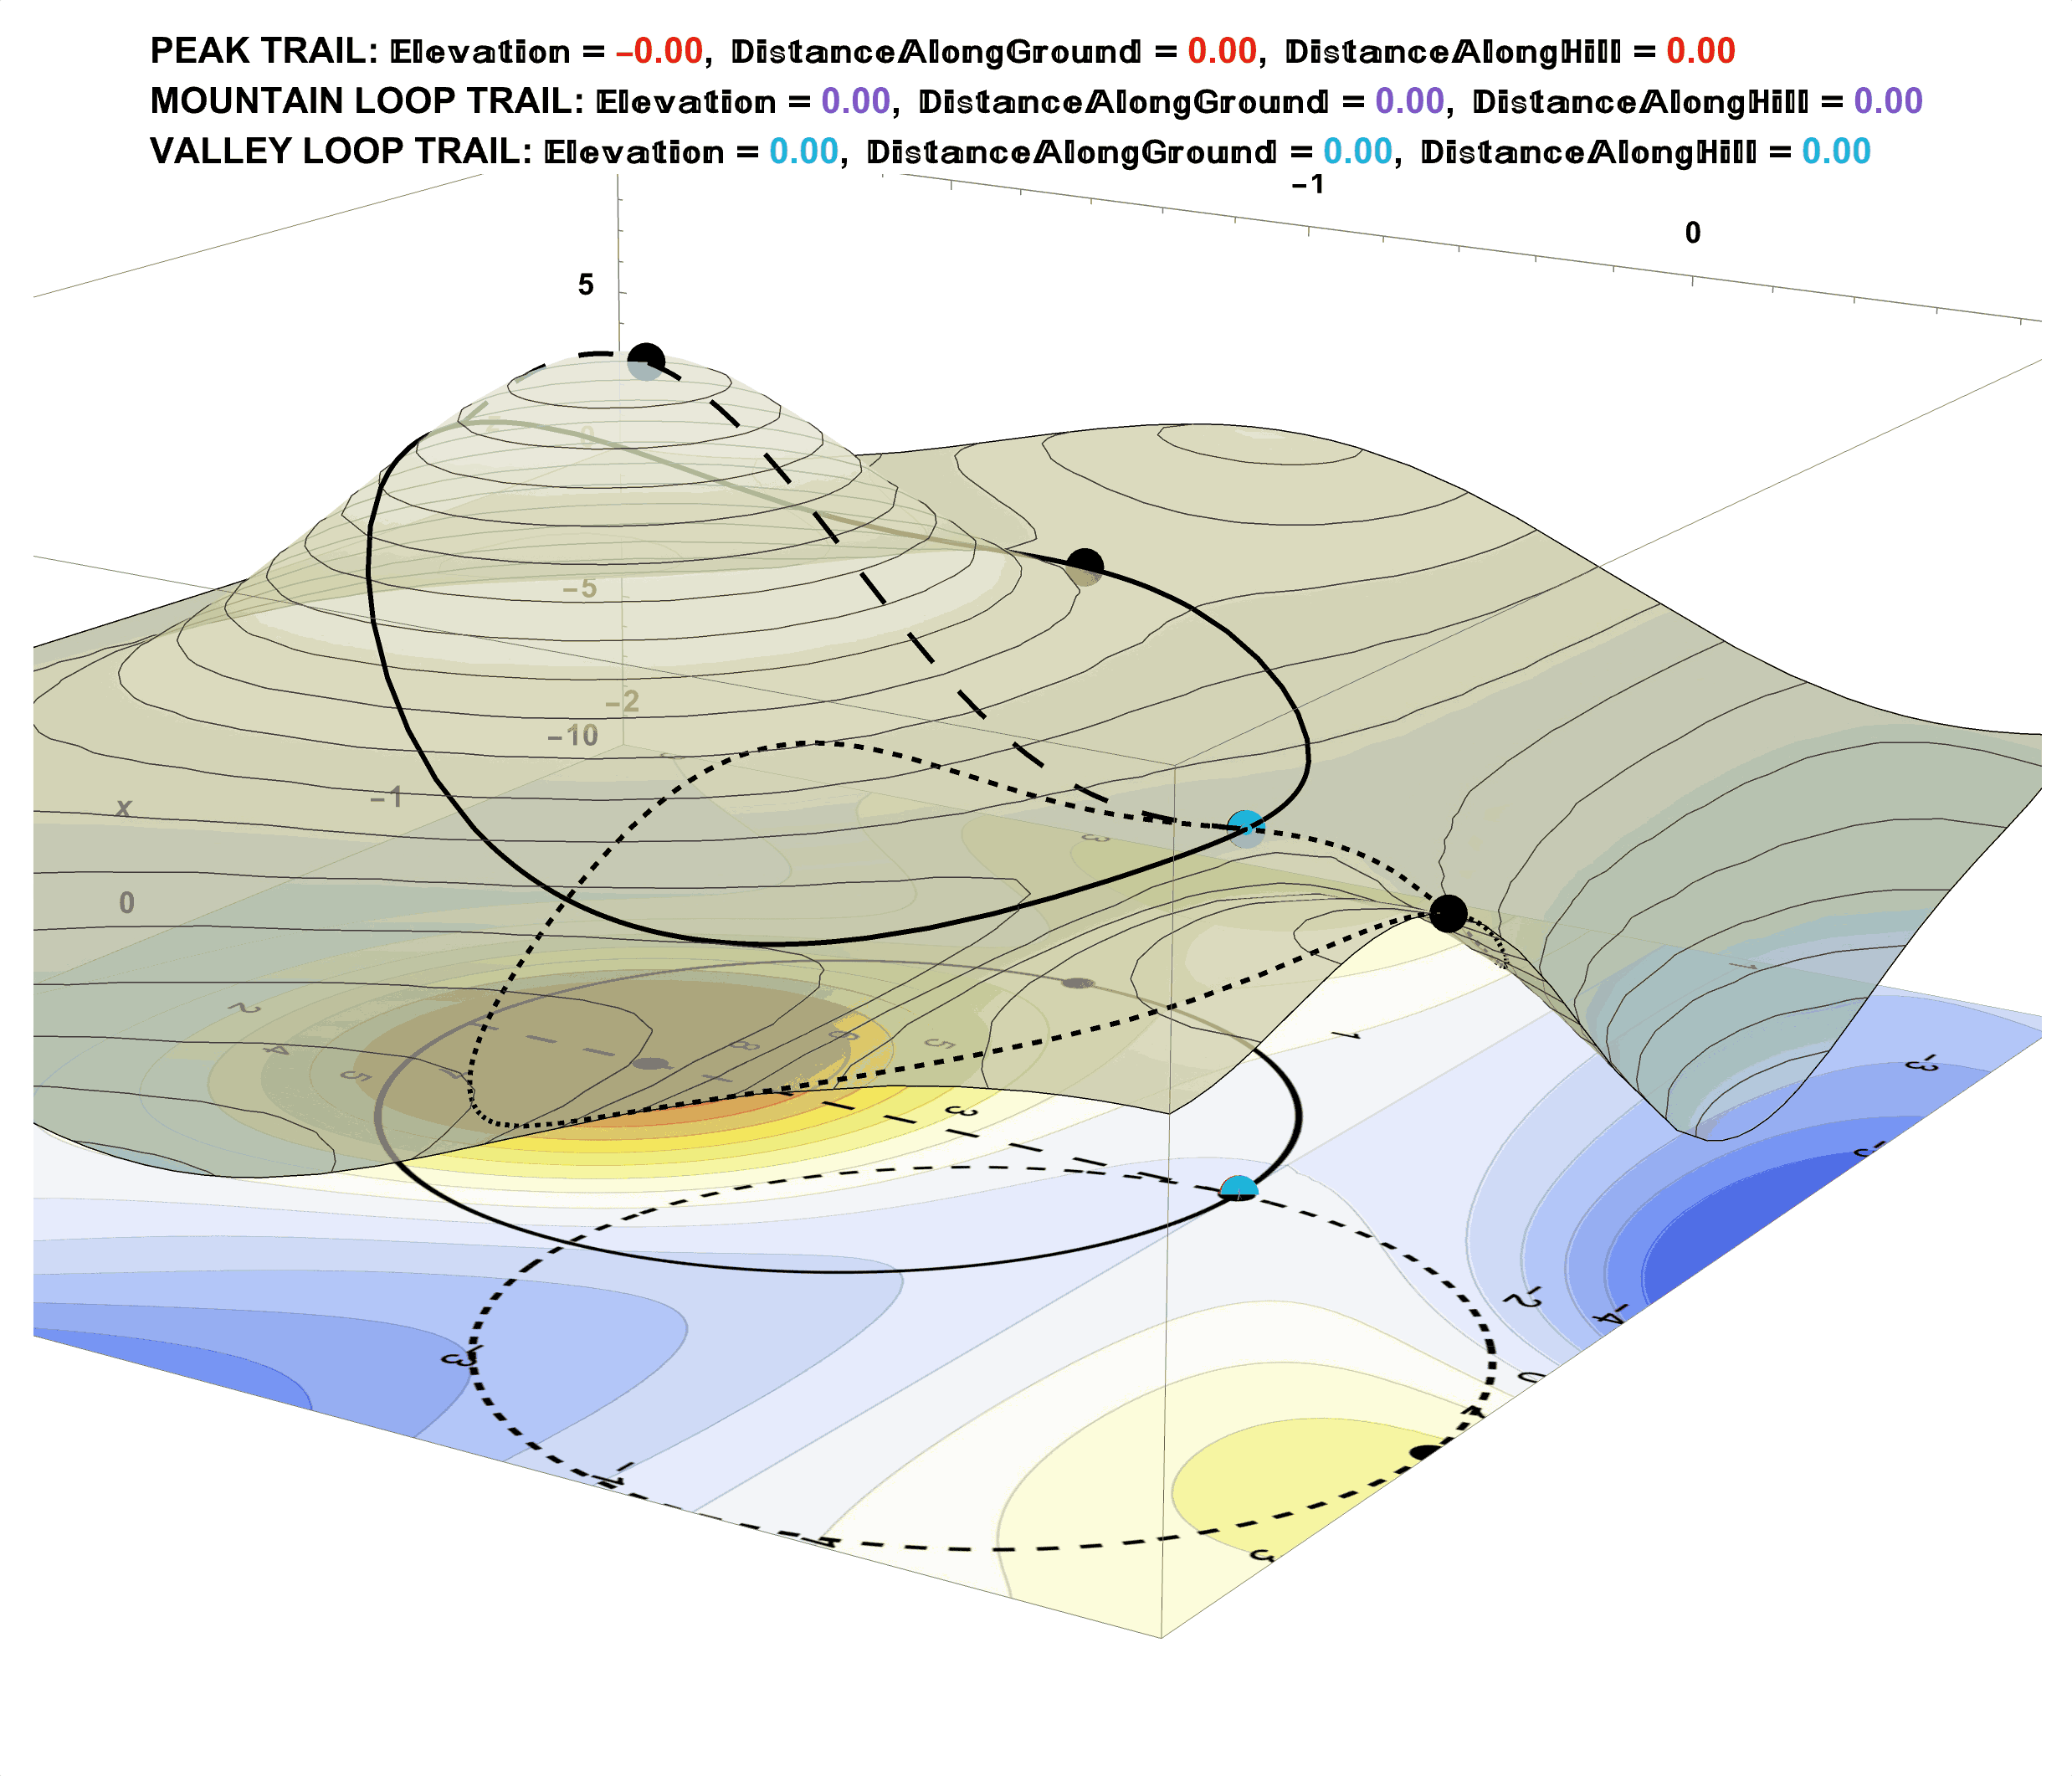 Distance Computations Between Points on the Surface Can Be Accomplished Using the Elevation Data in the Corresponding Topographical Map.